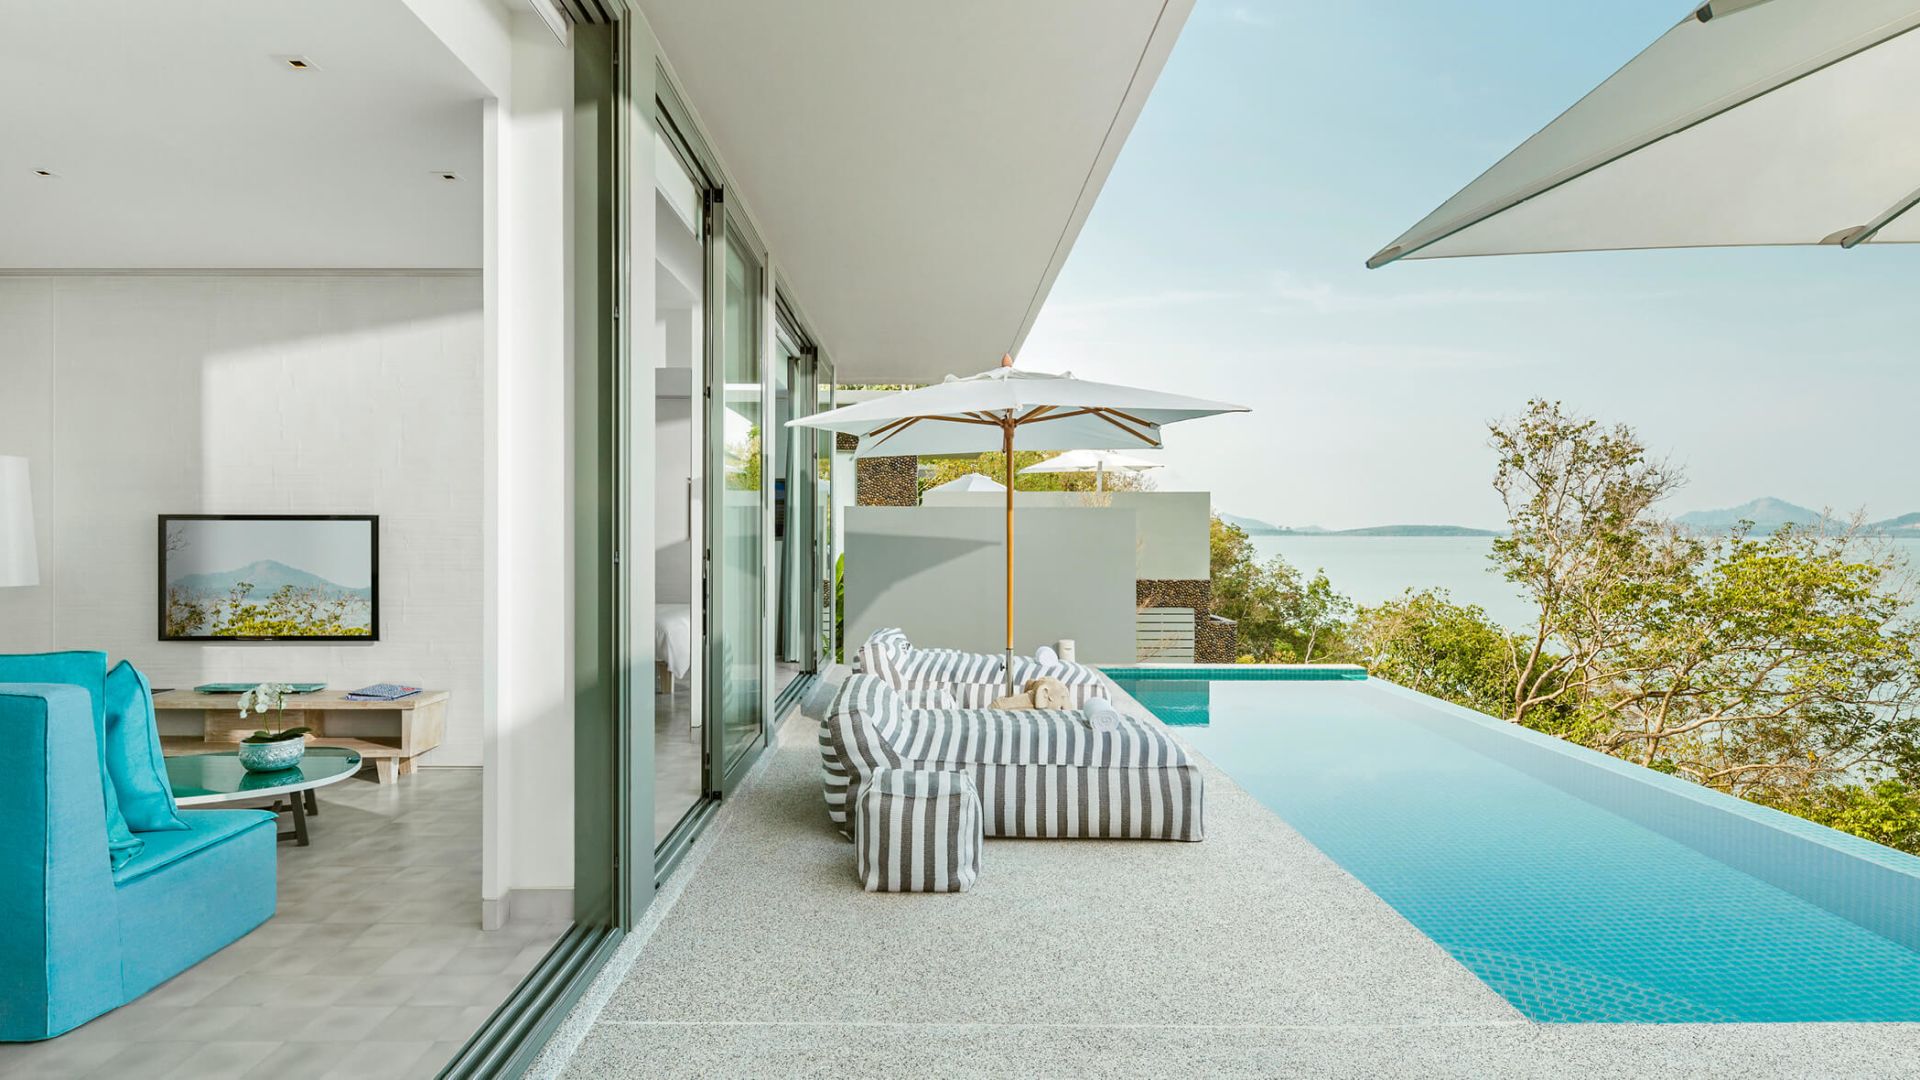 Private pool with outdoor sundeck and sun loungers - Image